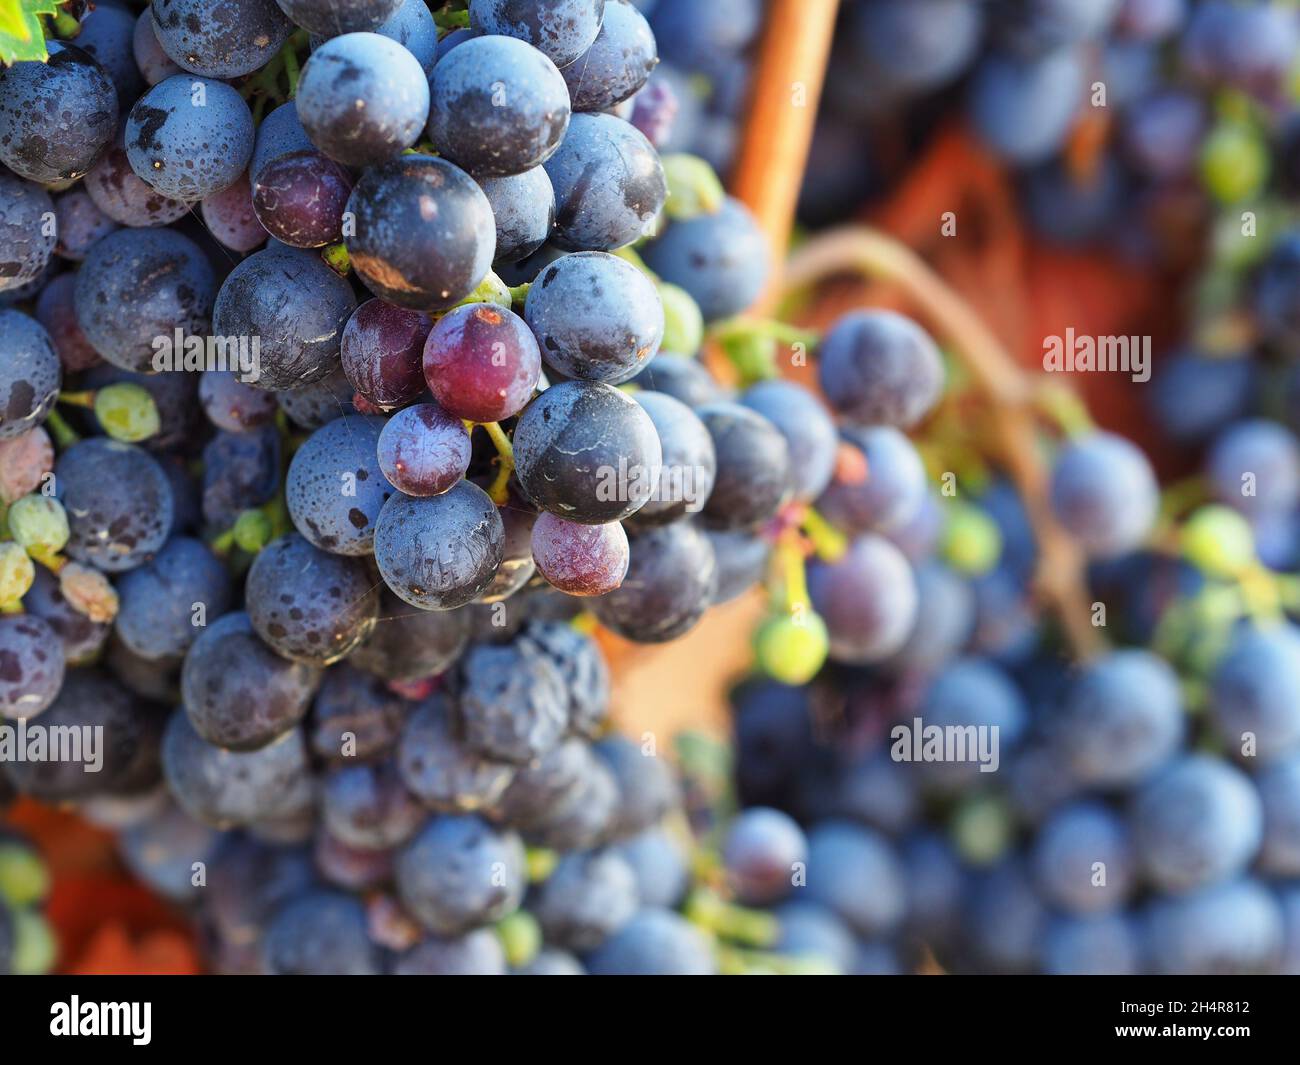 Bunch of grapes close up on blurred background Stock Photo